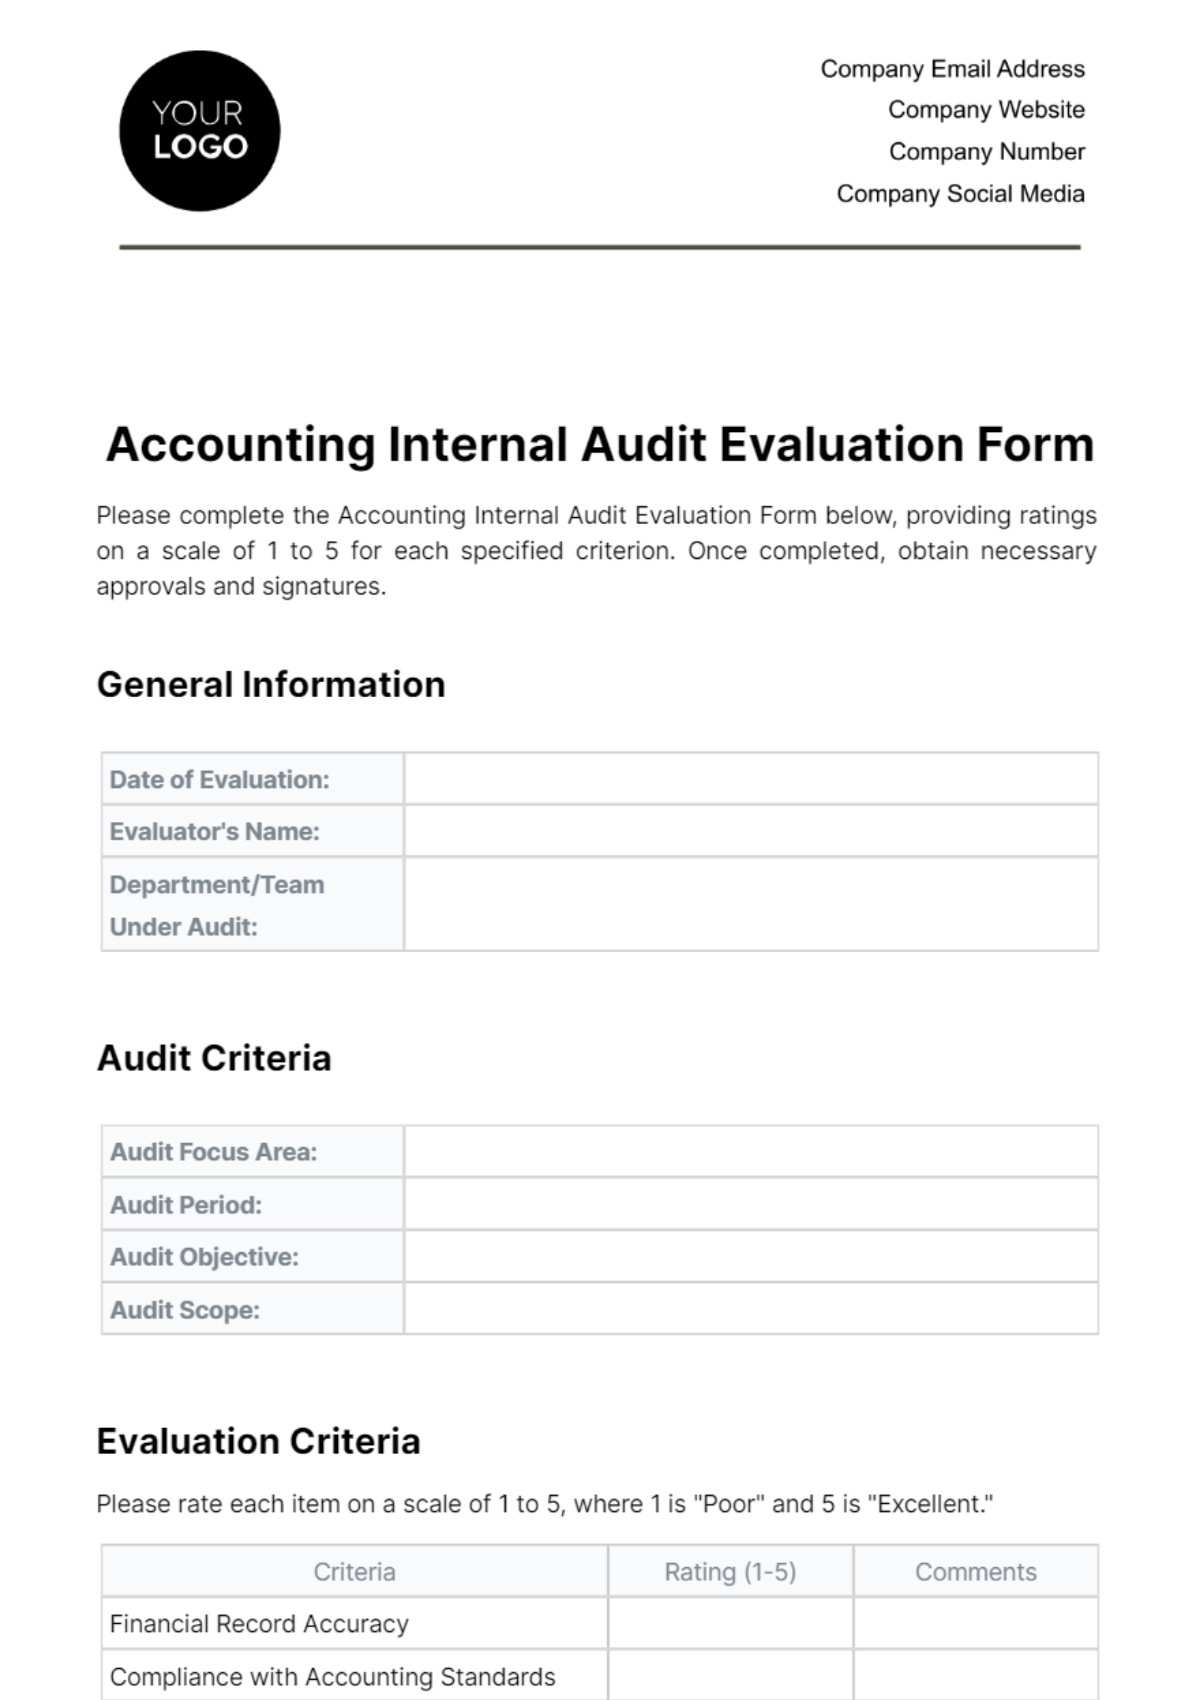 Free Accounting Internal Audit Evaluation Form Template